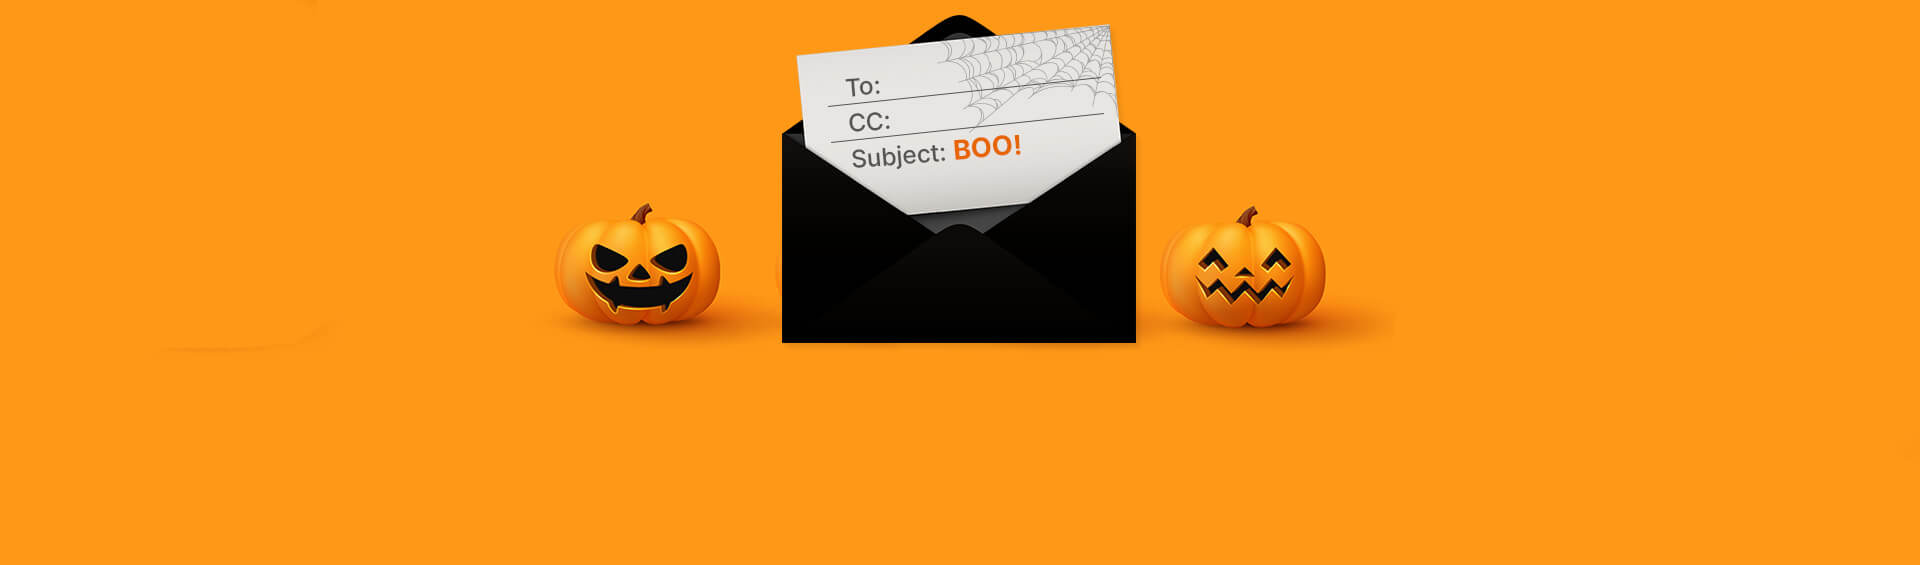 Spooktacular Halloween Email Subject Line Ideas for Successful Marketing Campaign